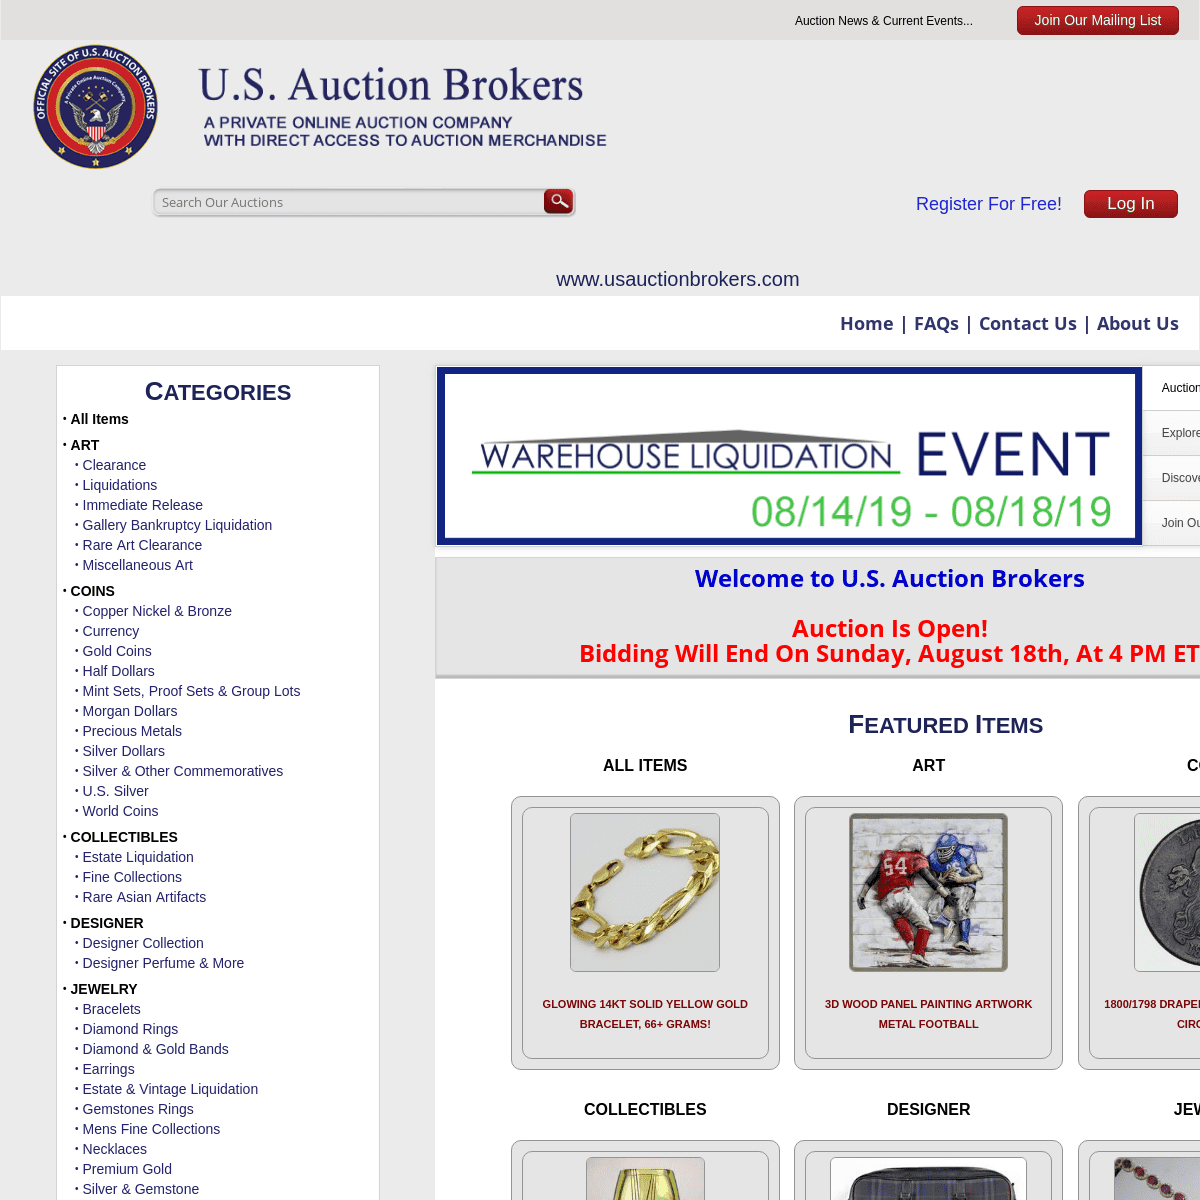 Welcome to US Auction Brokers, a Private Online Auction Co.